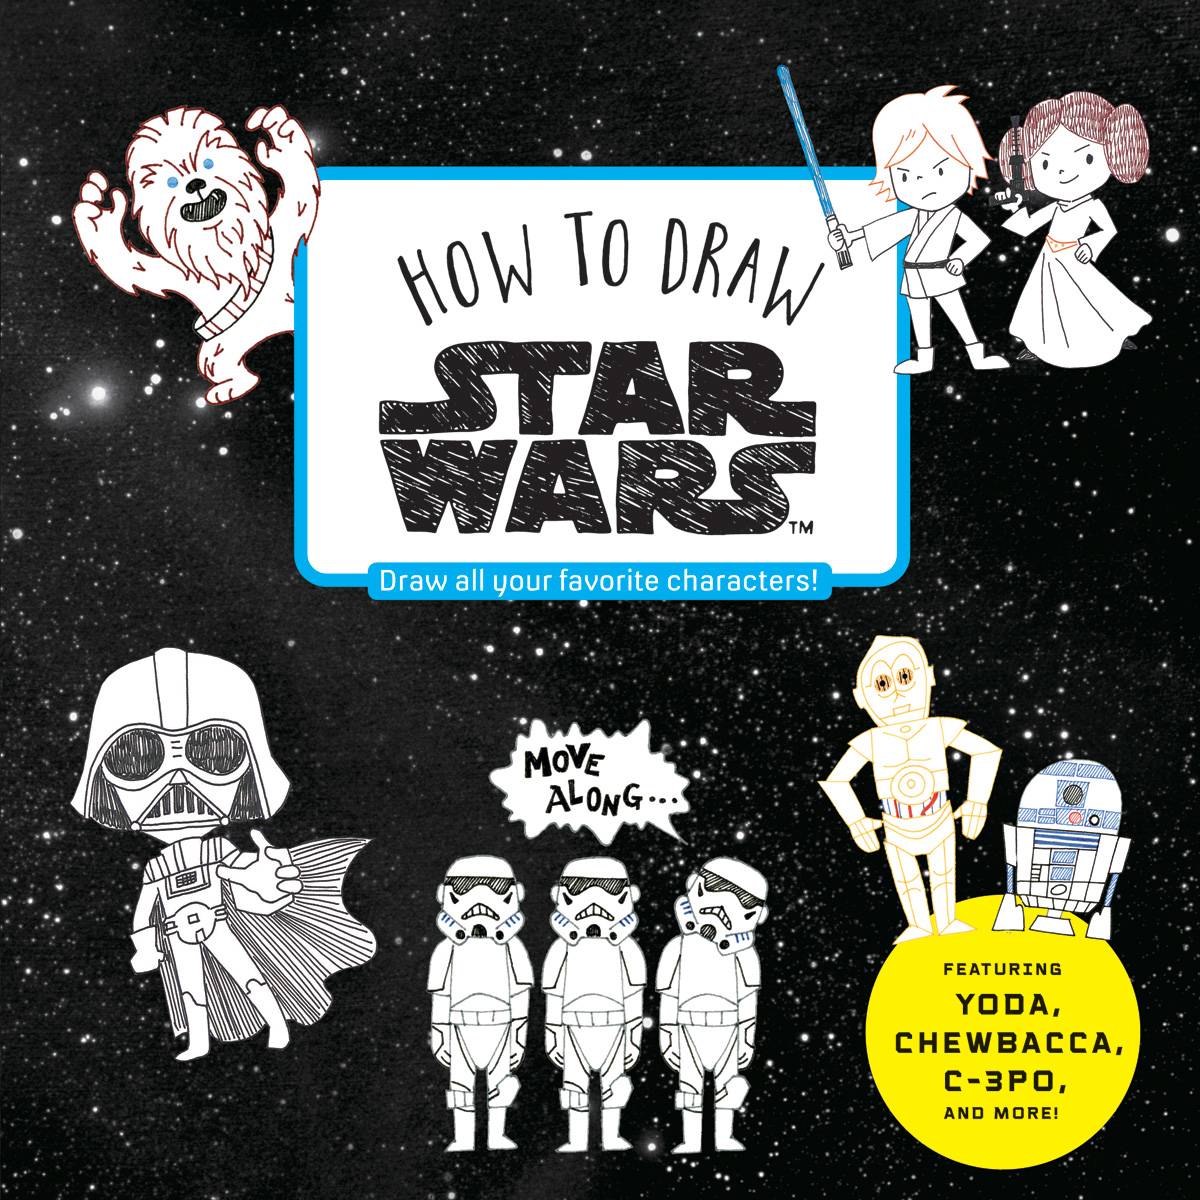 HOW TO DRAW STAR WARS GN